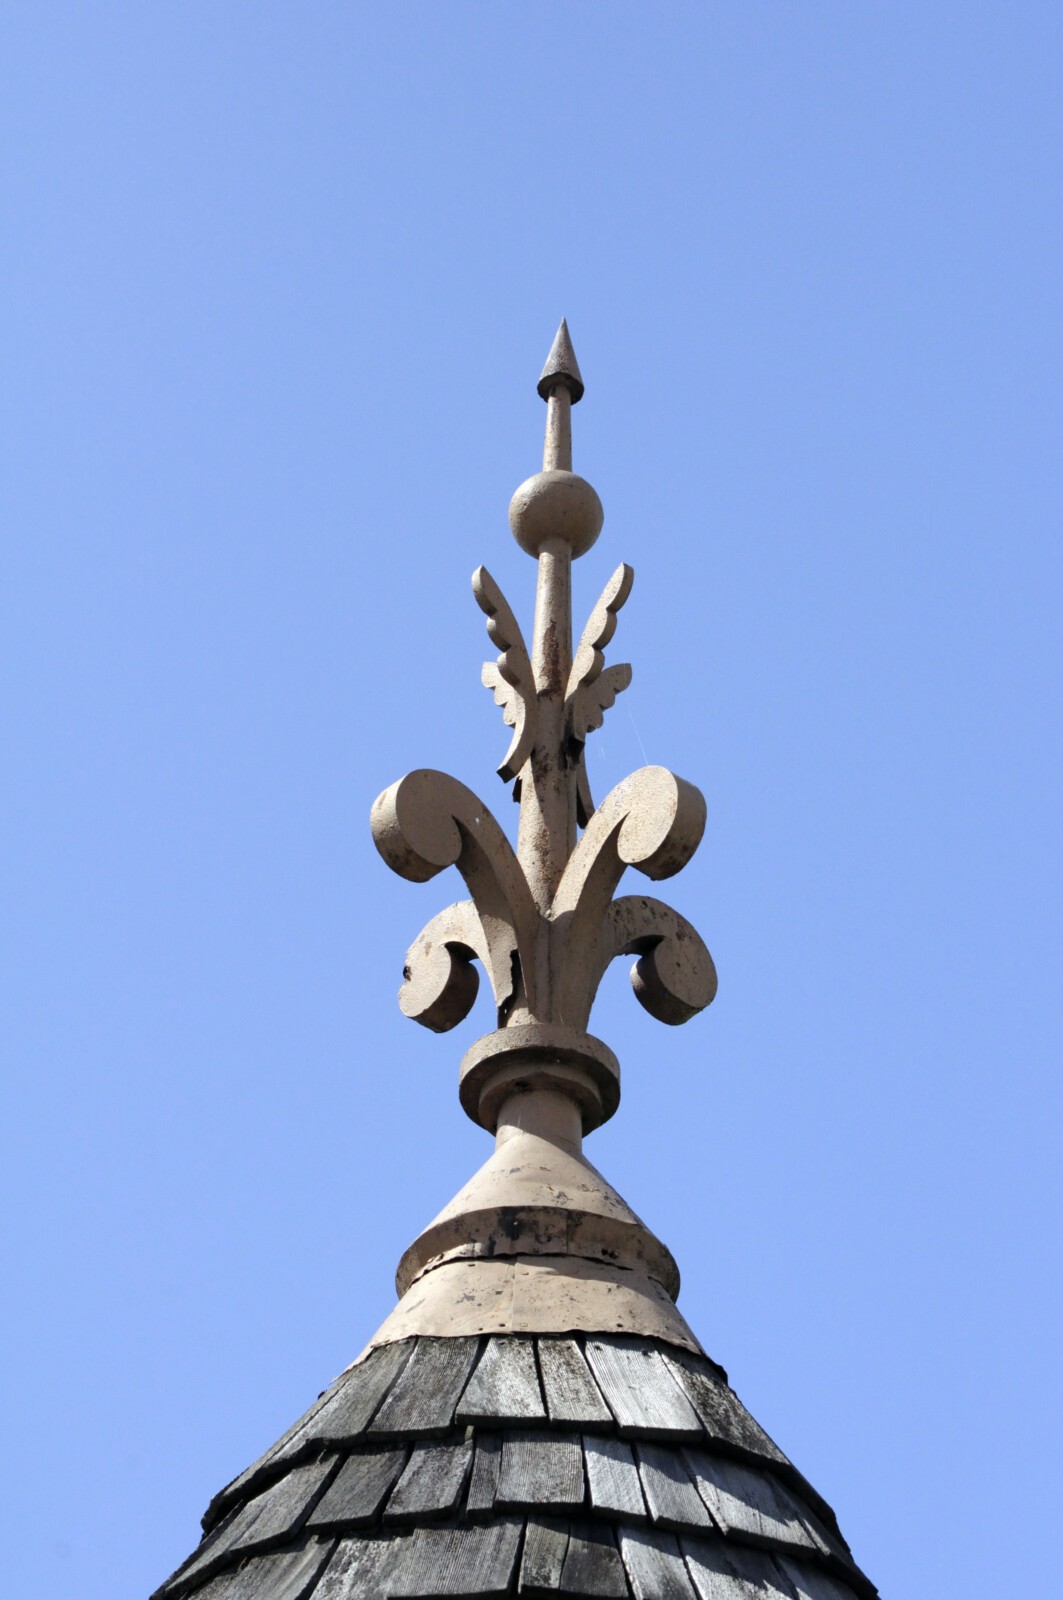 Metal finial atop the turret's candle snuffer roof